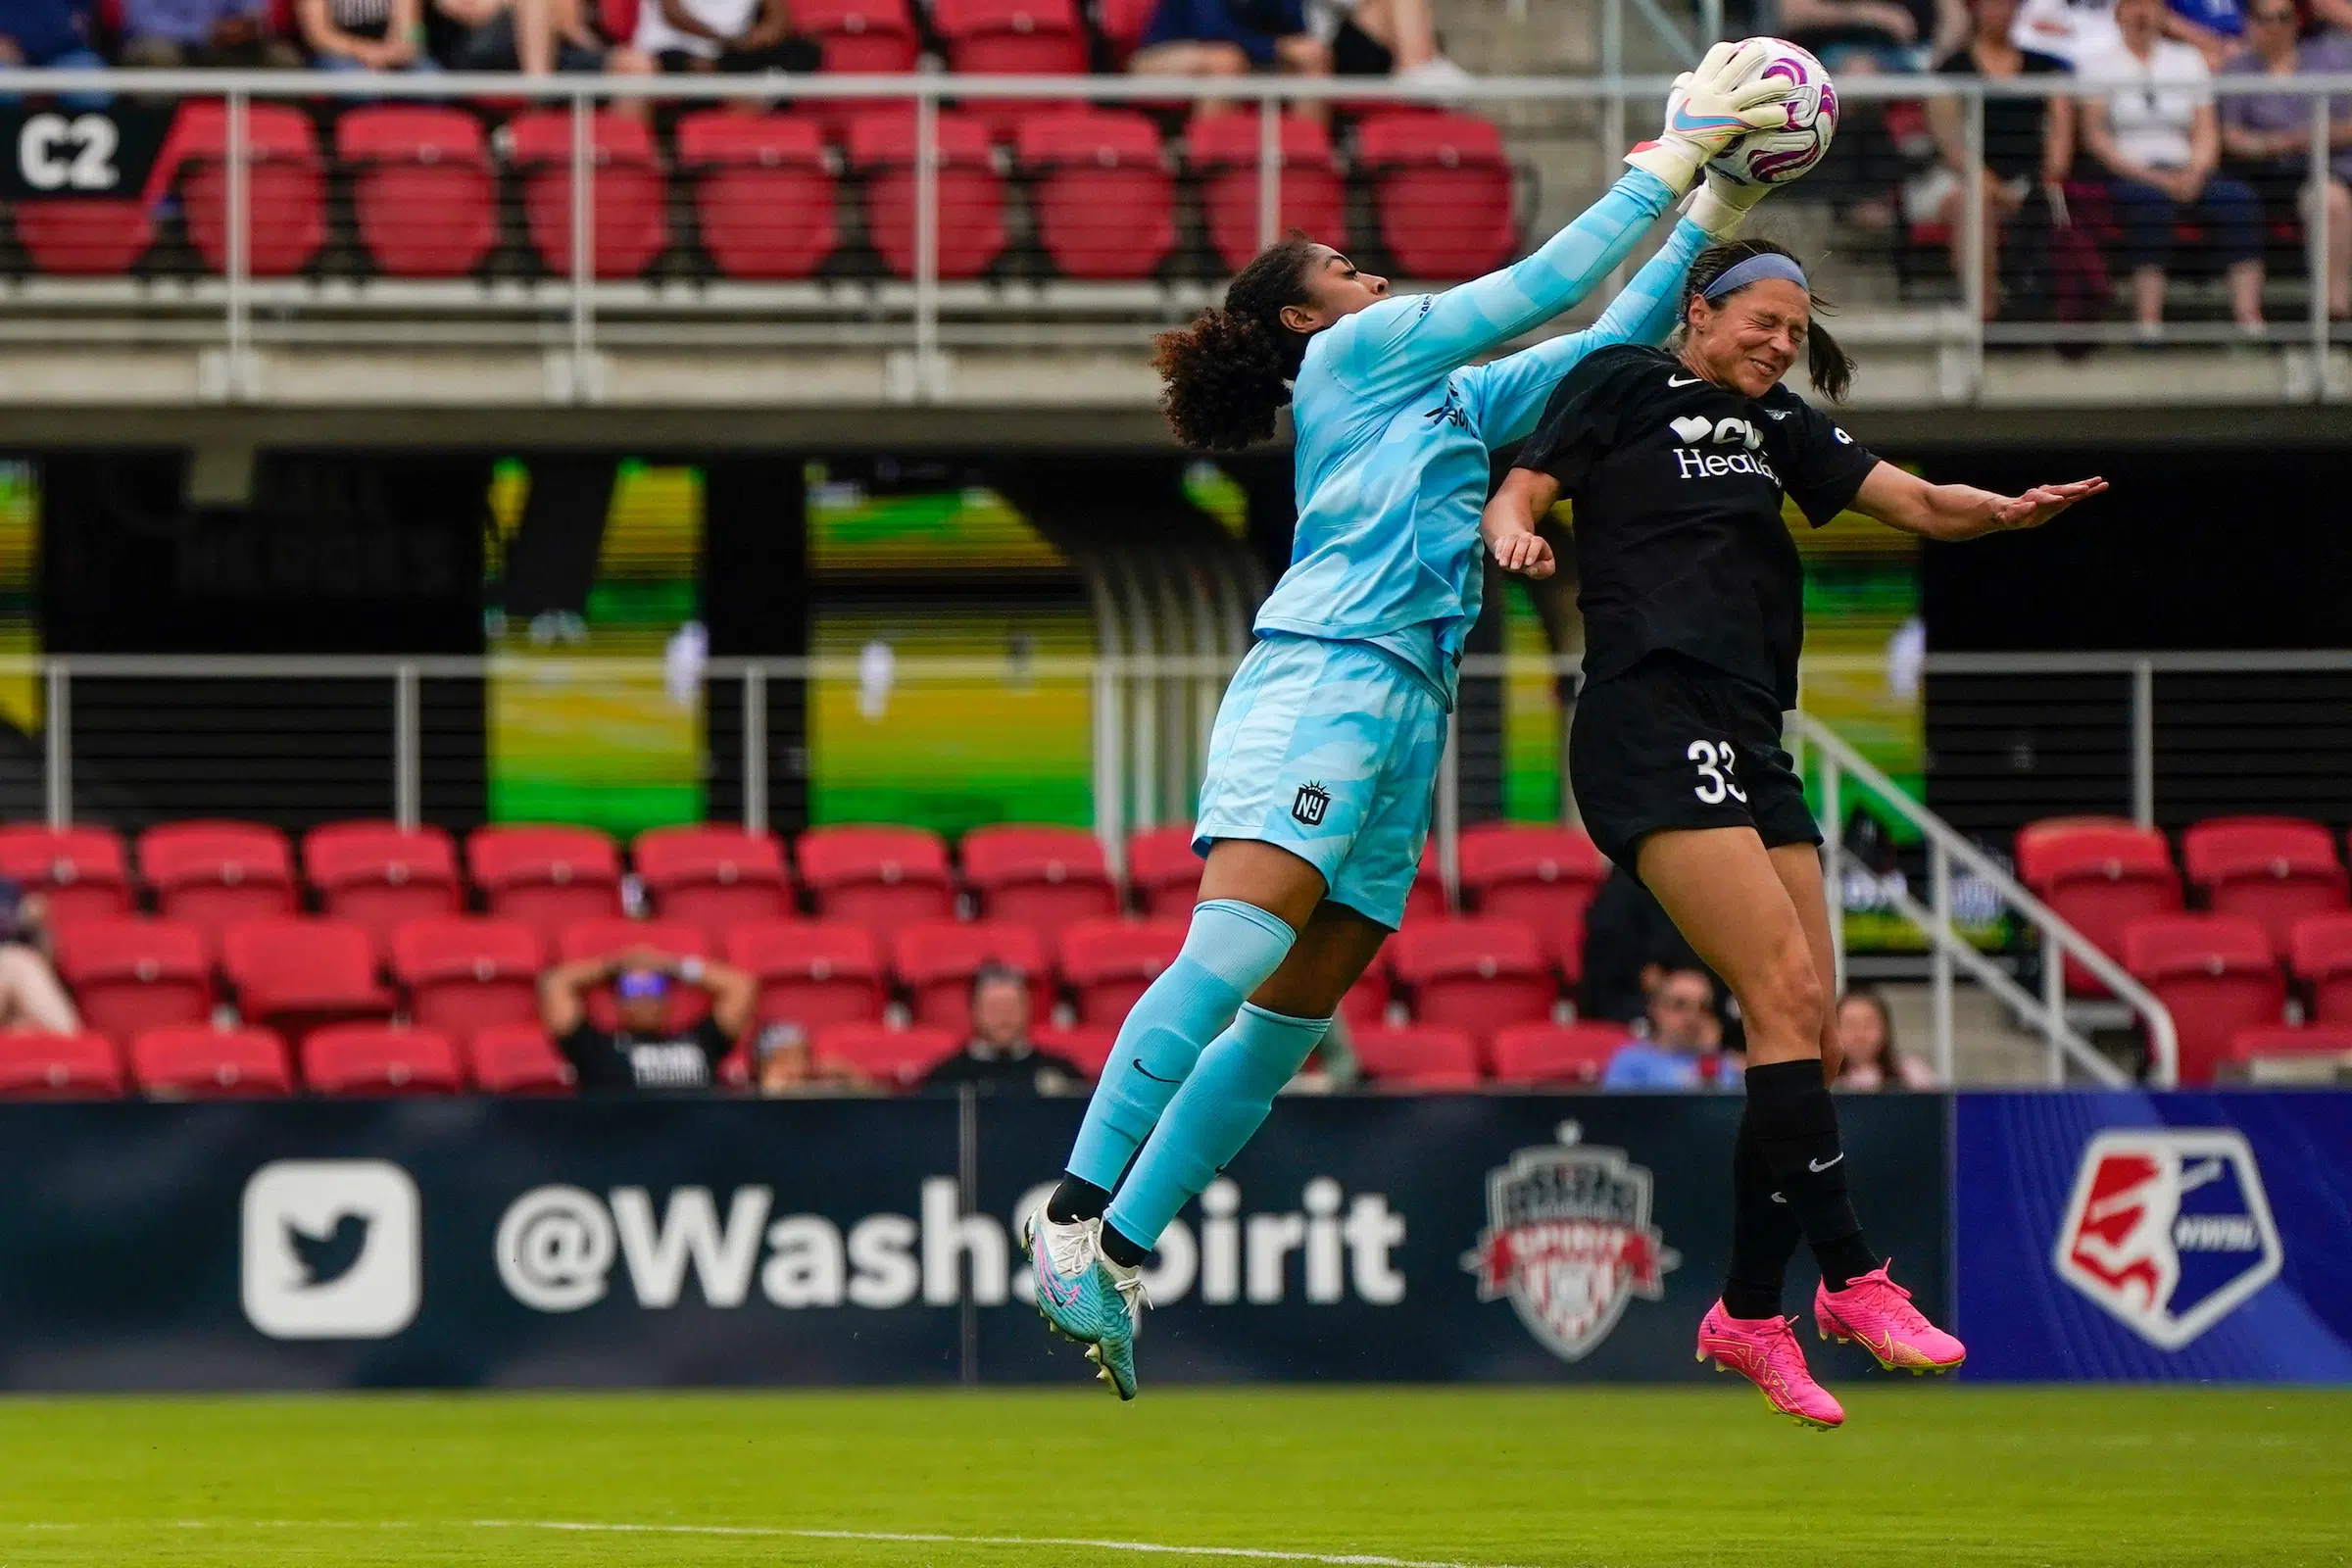 Ashley Hatch in a black uniform and pink cleats jumps to try and head a soccer ball as a goalie in a bright blue uniform jumps up to grab the ball.